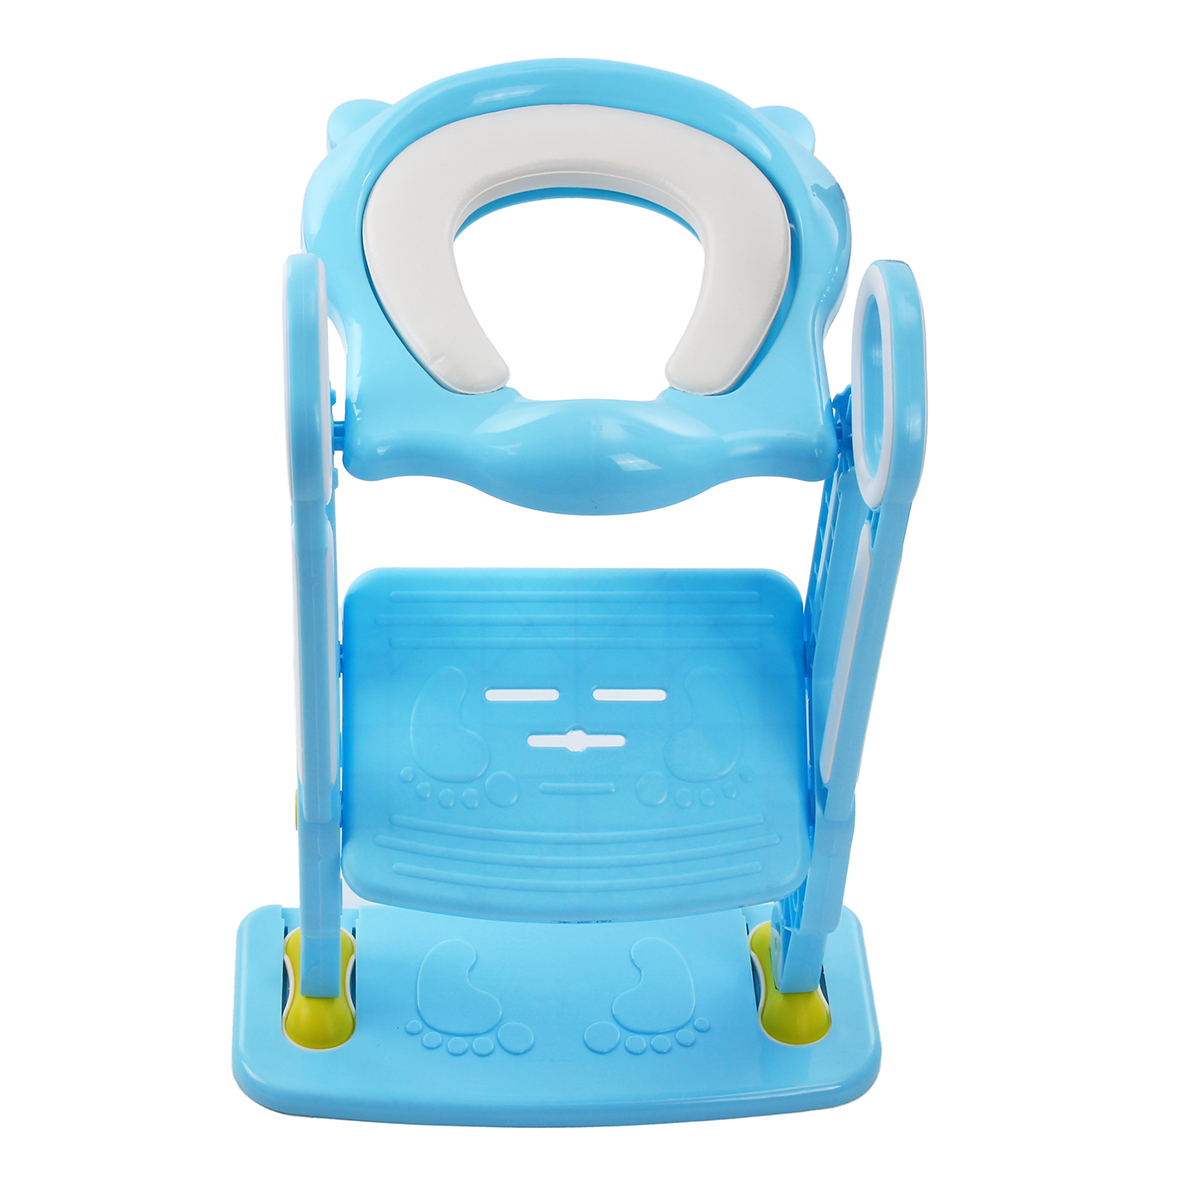 

Folding Baby Potty Infant Kids Toilet Training Seat with Adjustable Ladder Portable Urinal Potty Training Seats for Children